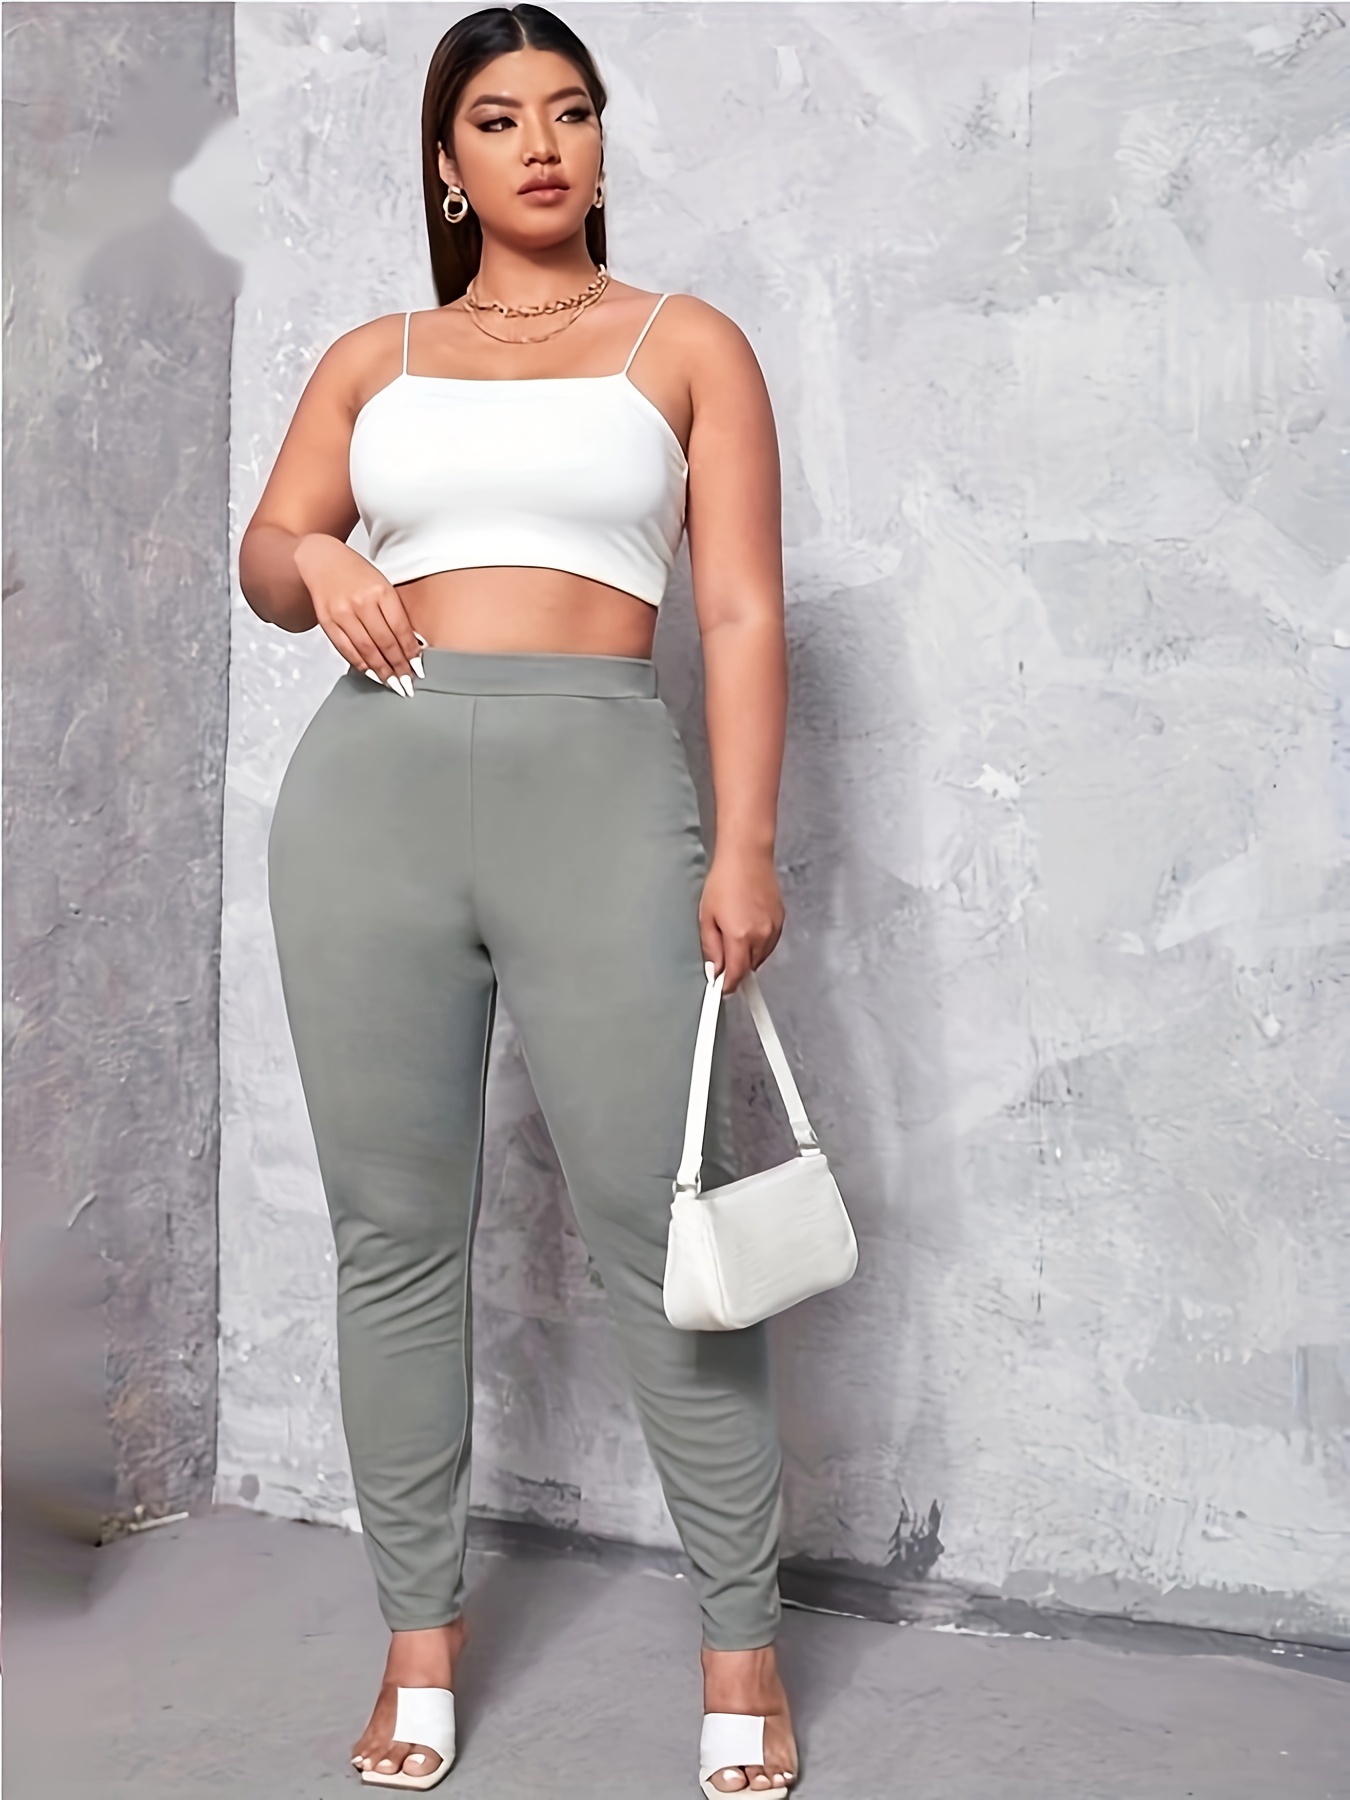 Plus Size Solid Pocket Leggings, Casual High Waist Stretchy Leggings,  Women's Plus Size Clothing